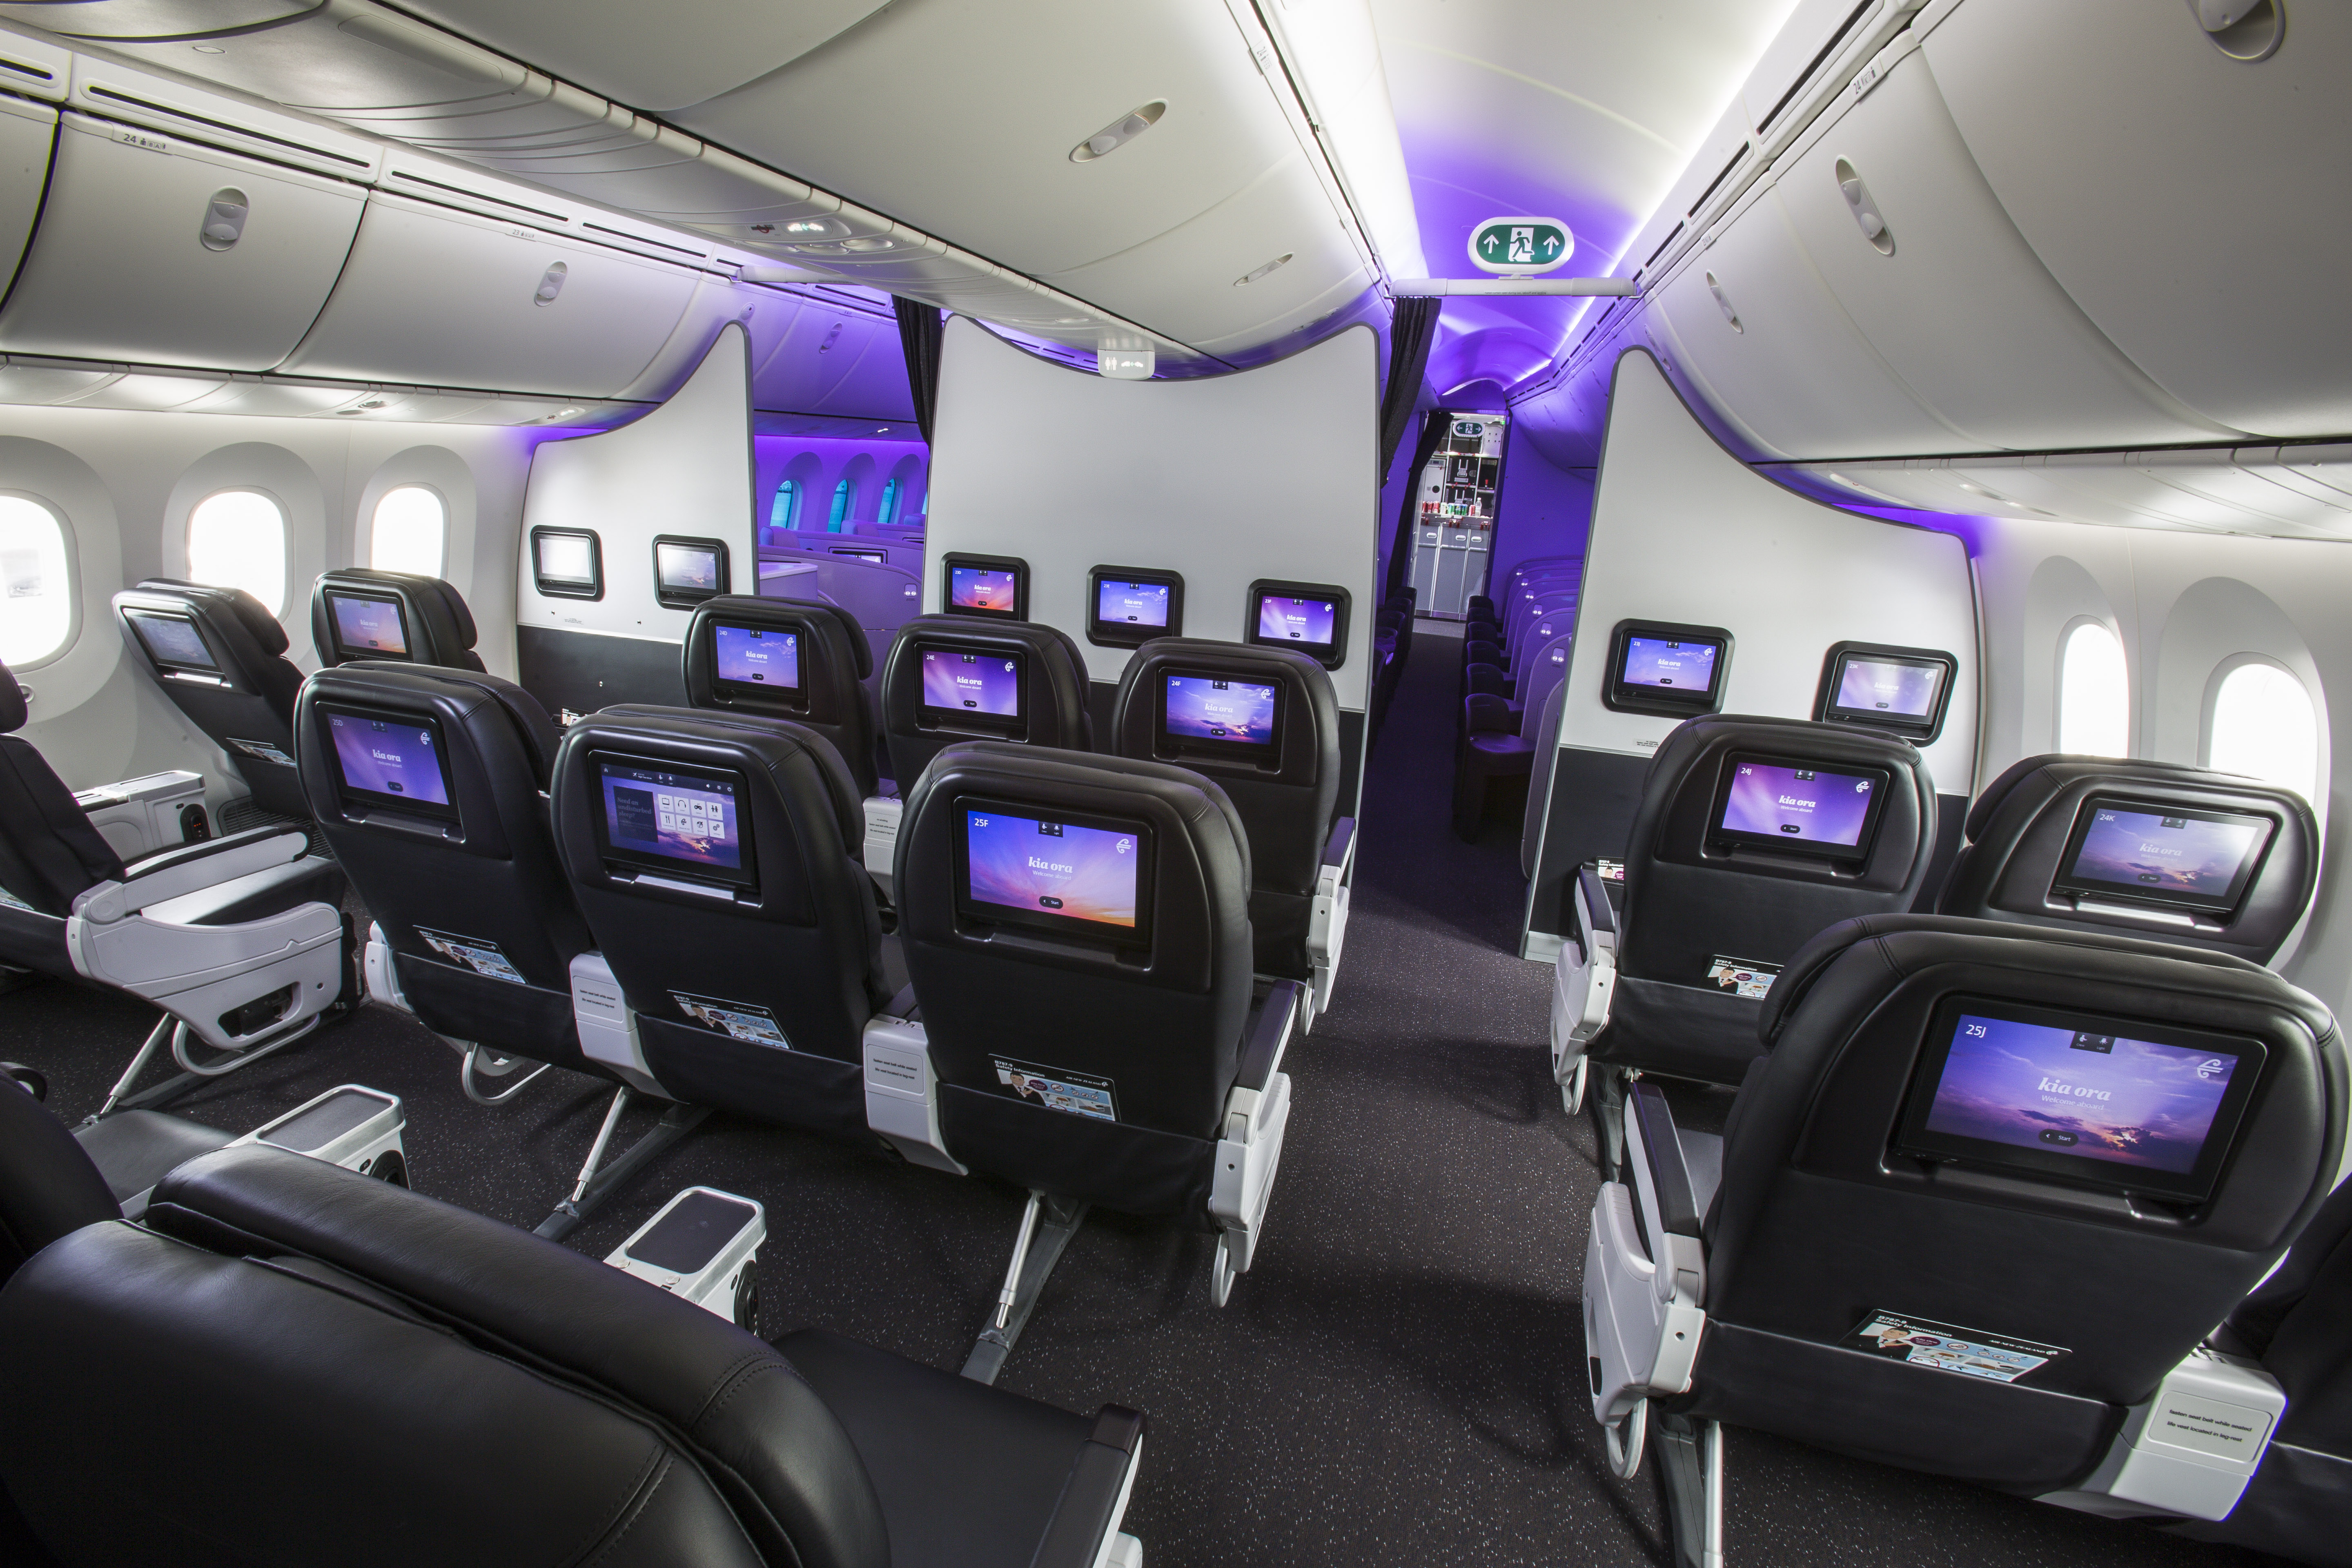 Look Inside the Awesome New Air New Zealand B787-9 Cabin